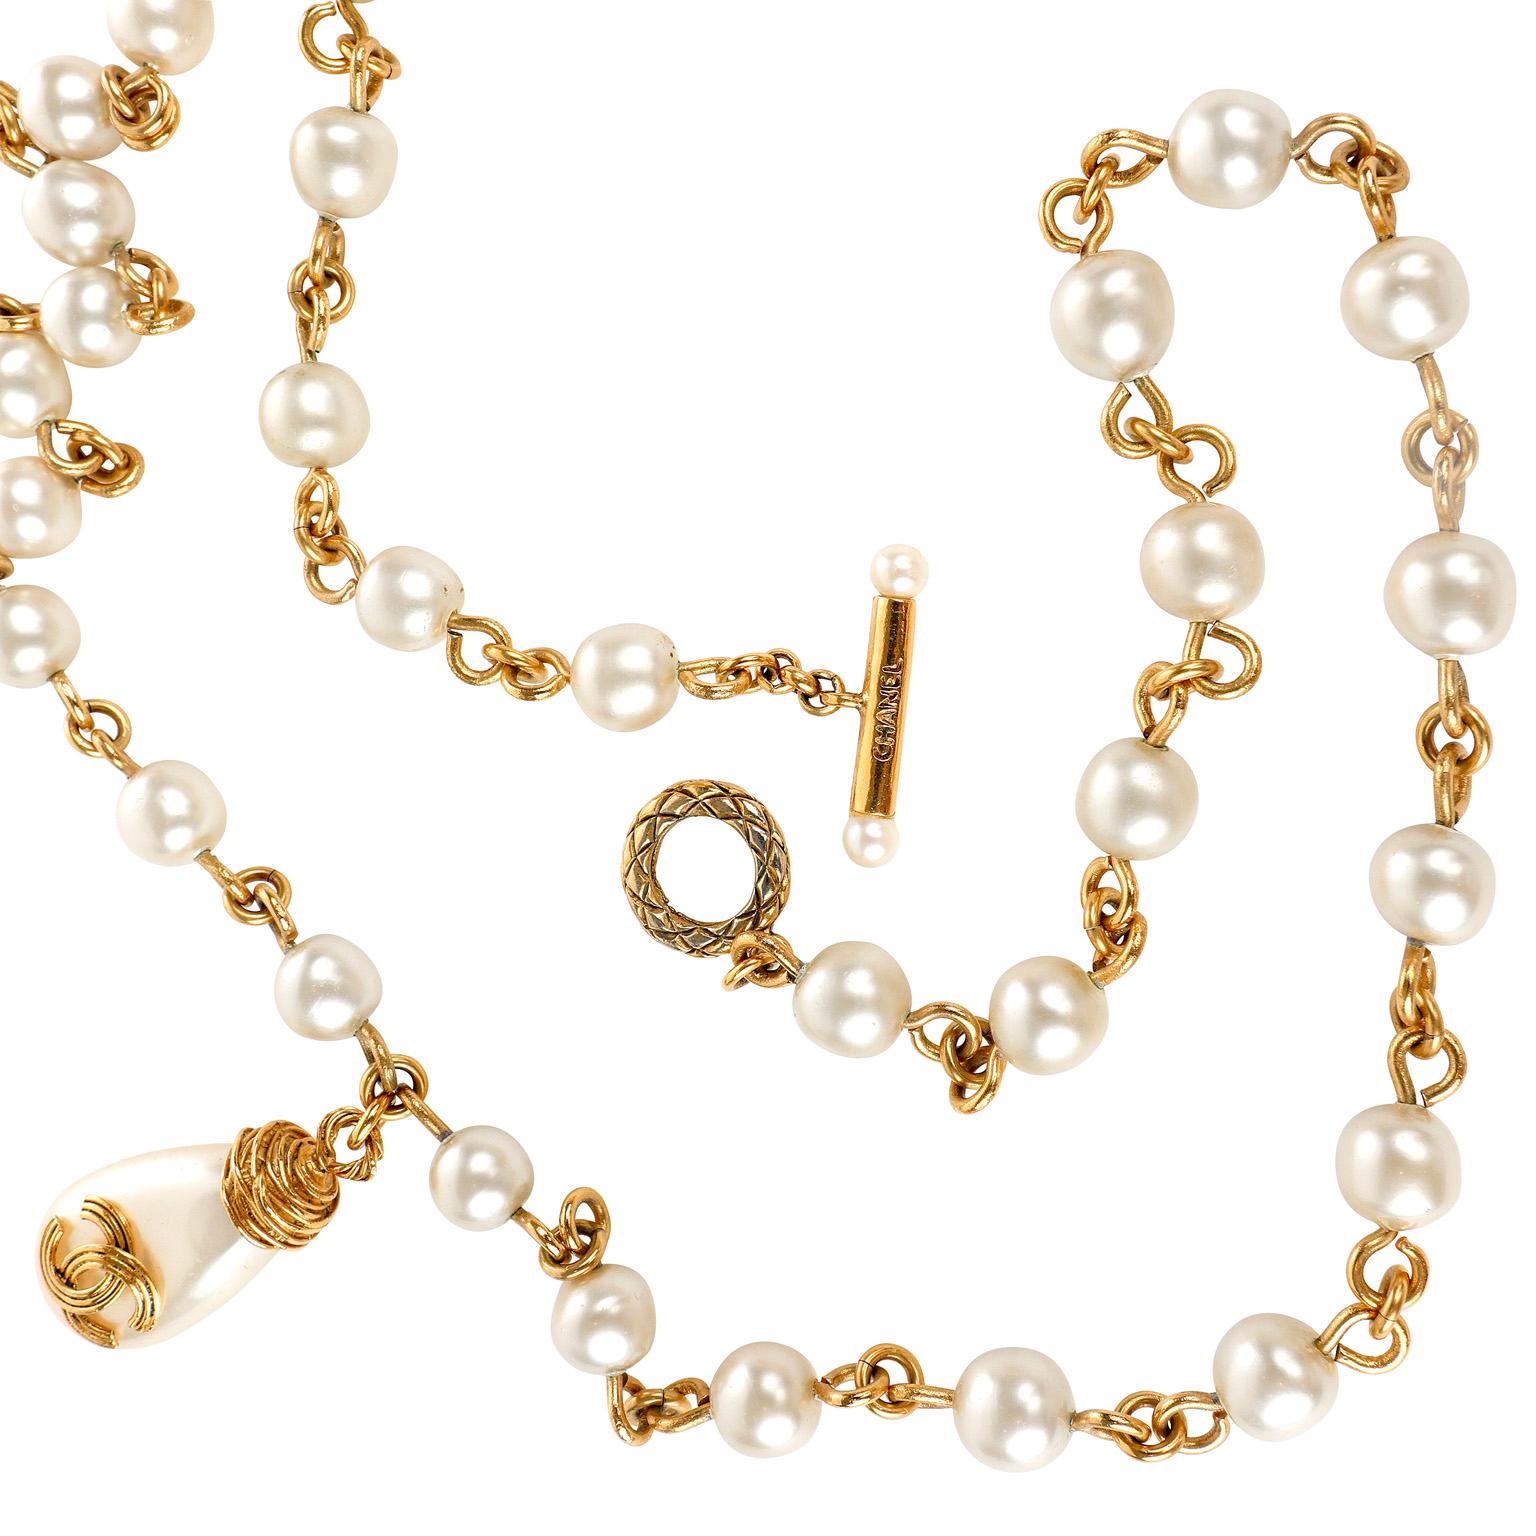 This authentic Chanel Pearl Necklace with Large CC Pearl Charm is in mint vintage condition.  24 karat gold plated chain with faux pearls.  A single large tear drop CC adorned pearl acts as the centerpiece.   Box or pouch included.

PBF 12829